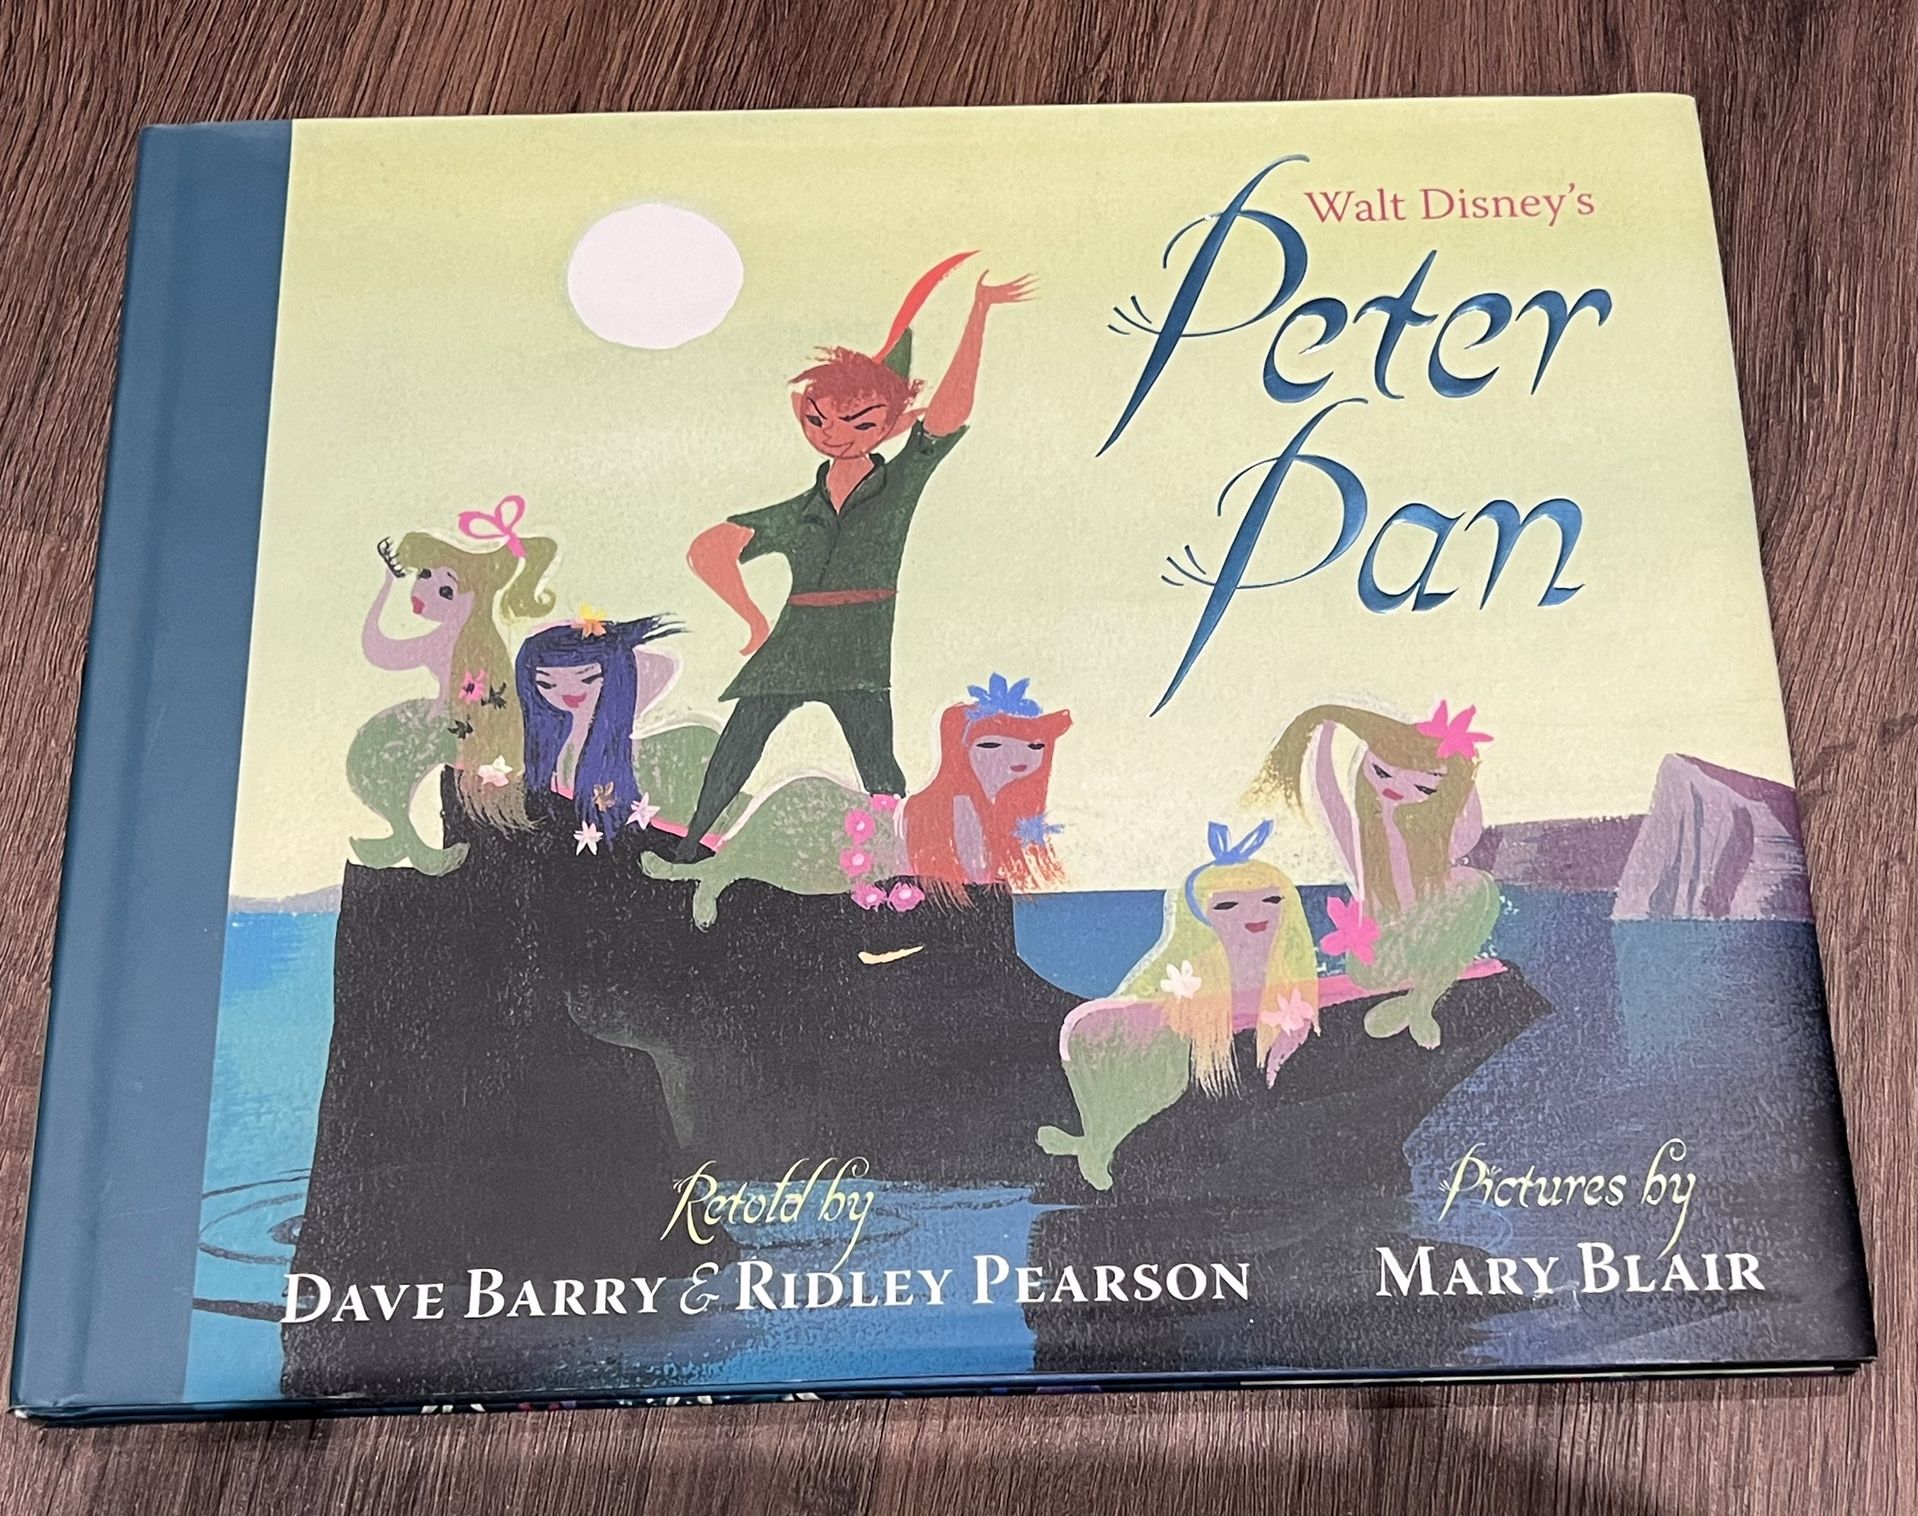 Walt Disney’s Peter Pan by Dave Barry. First Edition 